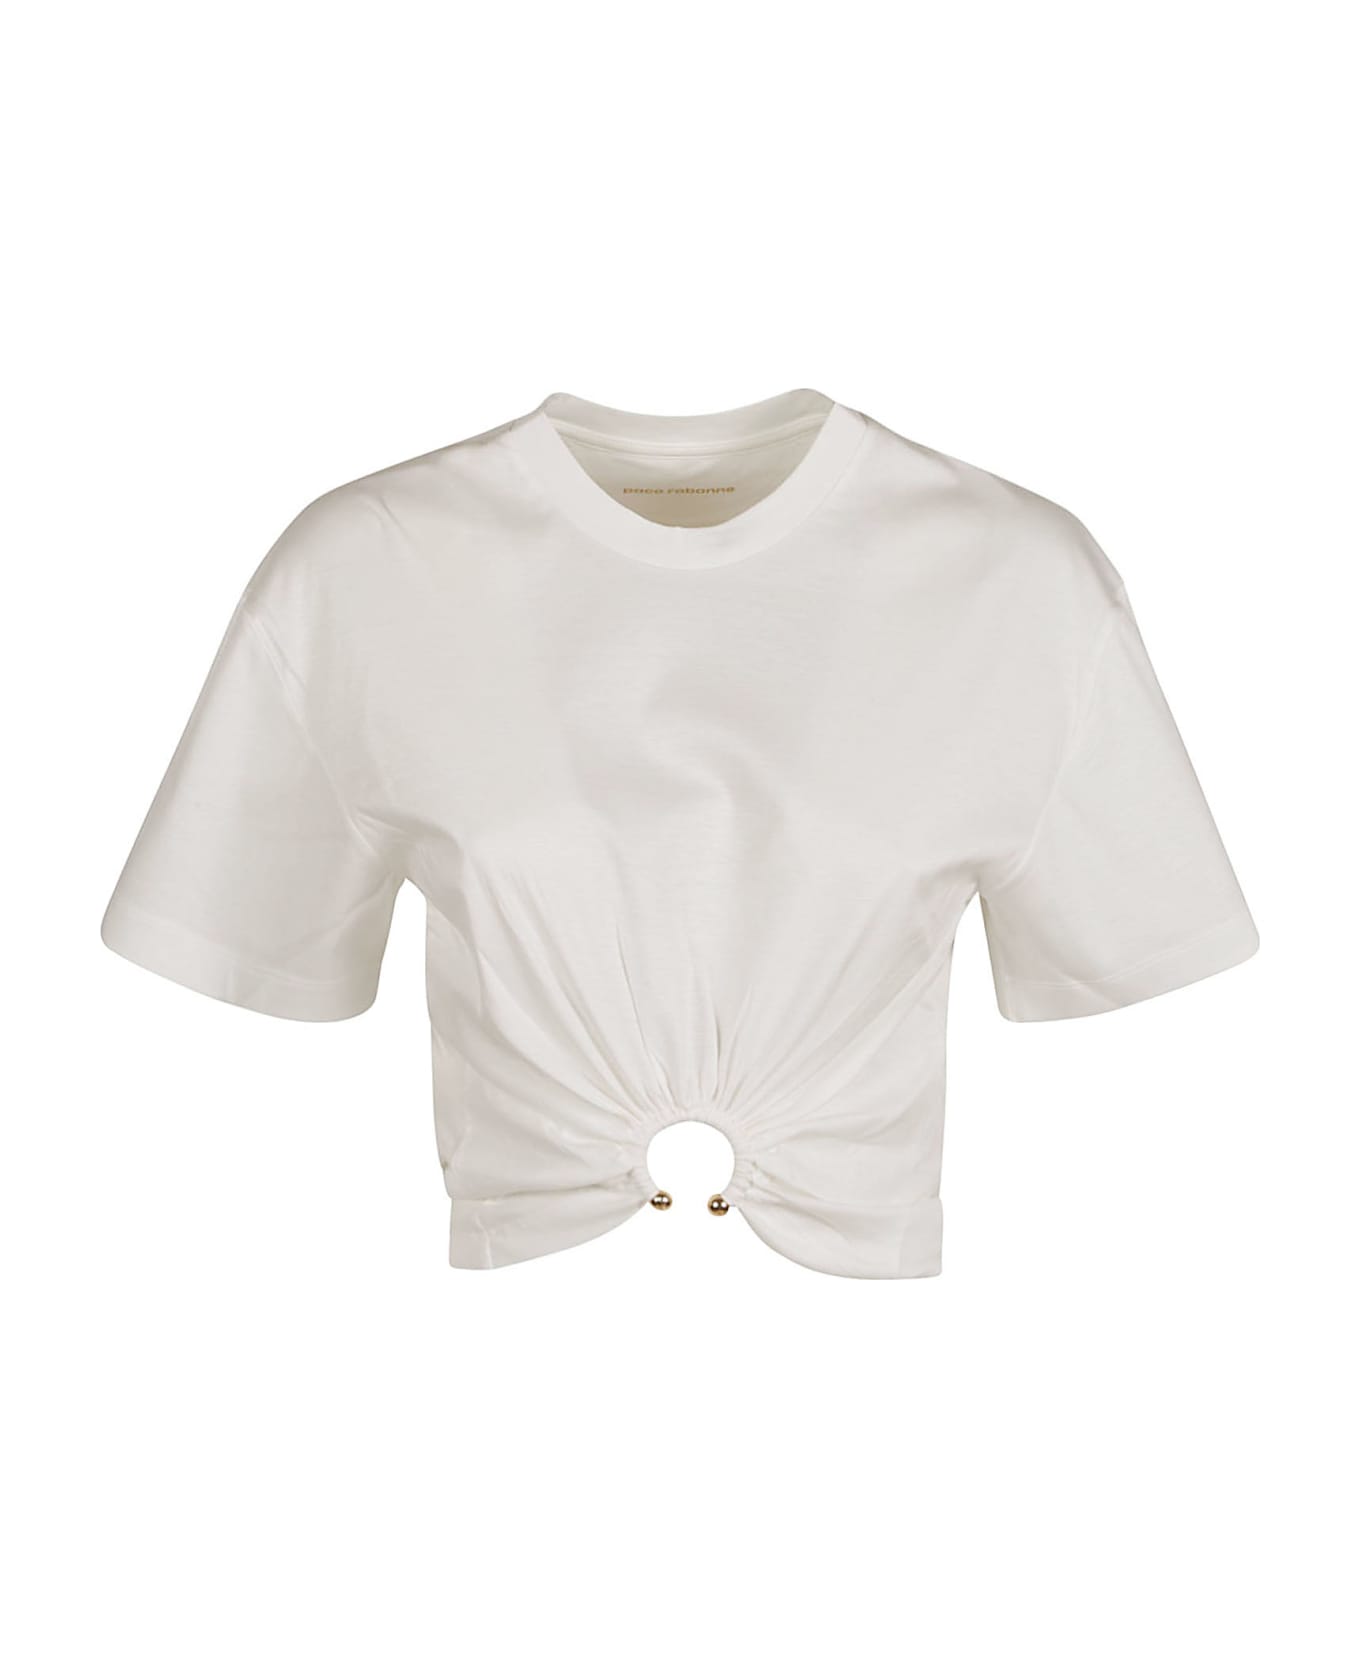 Paco Rabanne Cropped T-shirt - Off-White